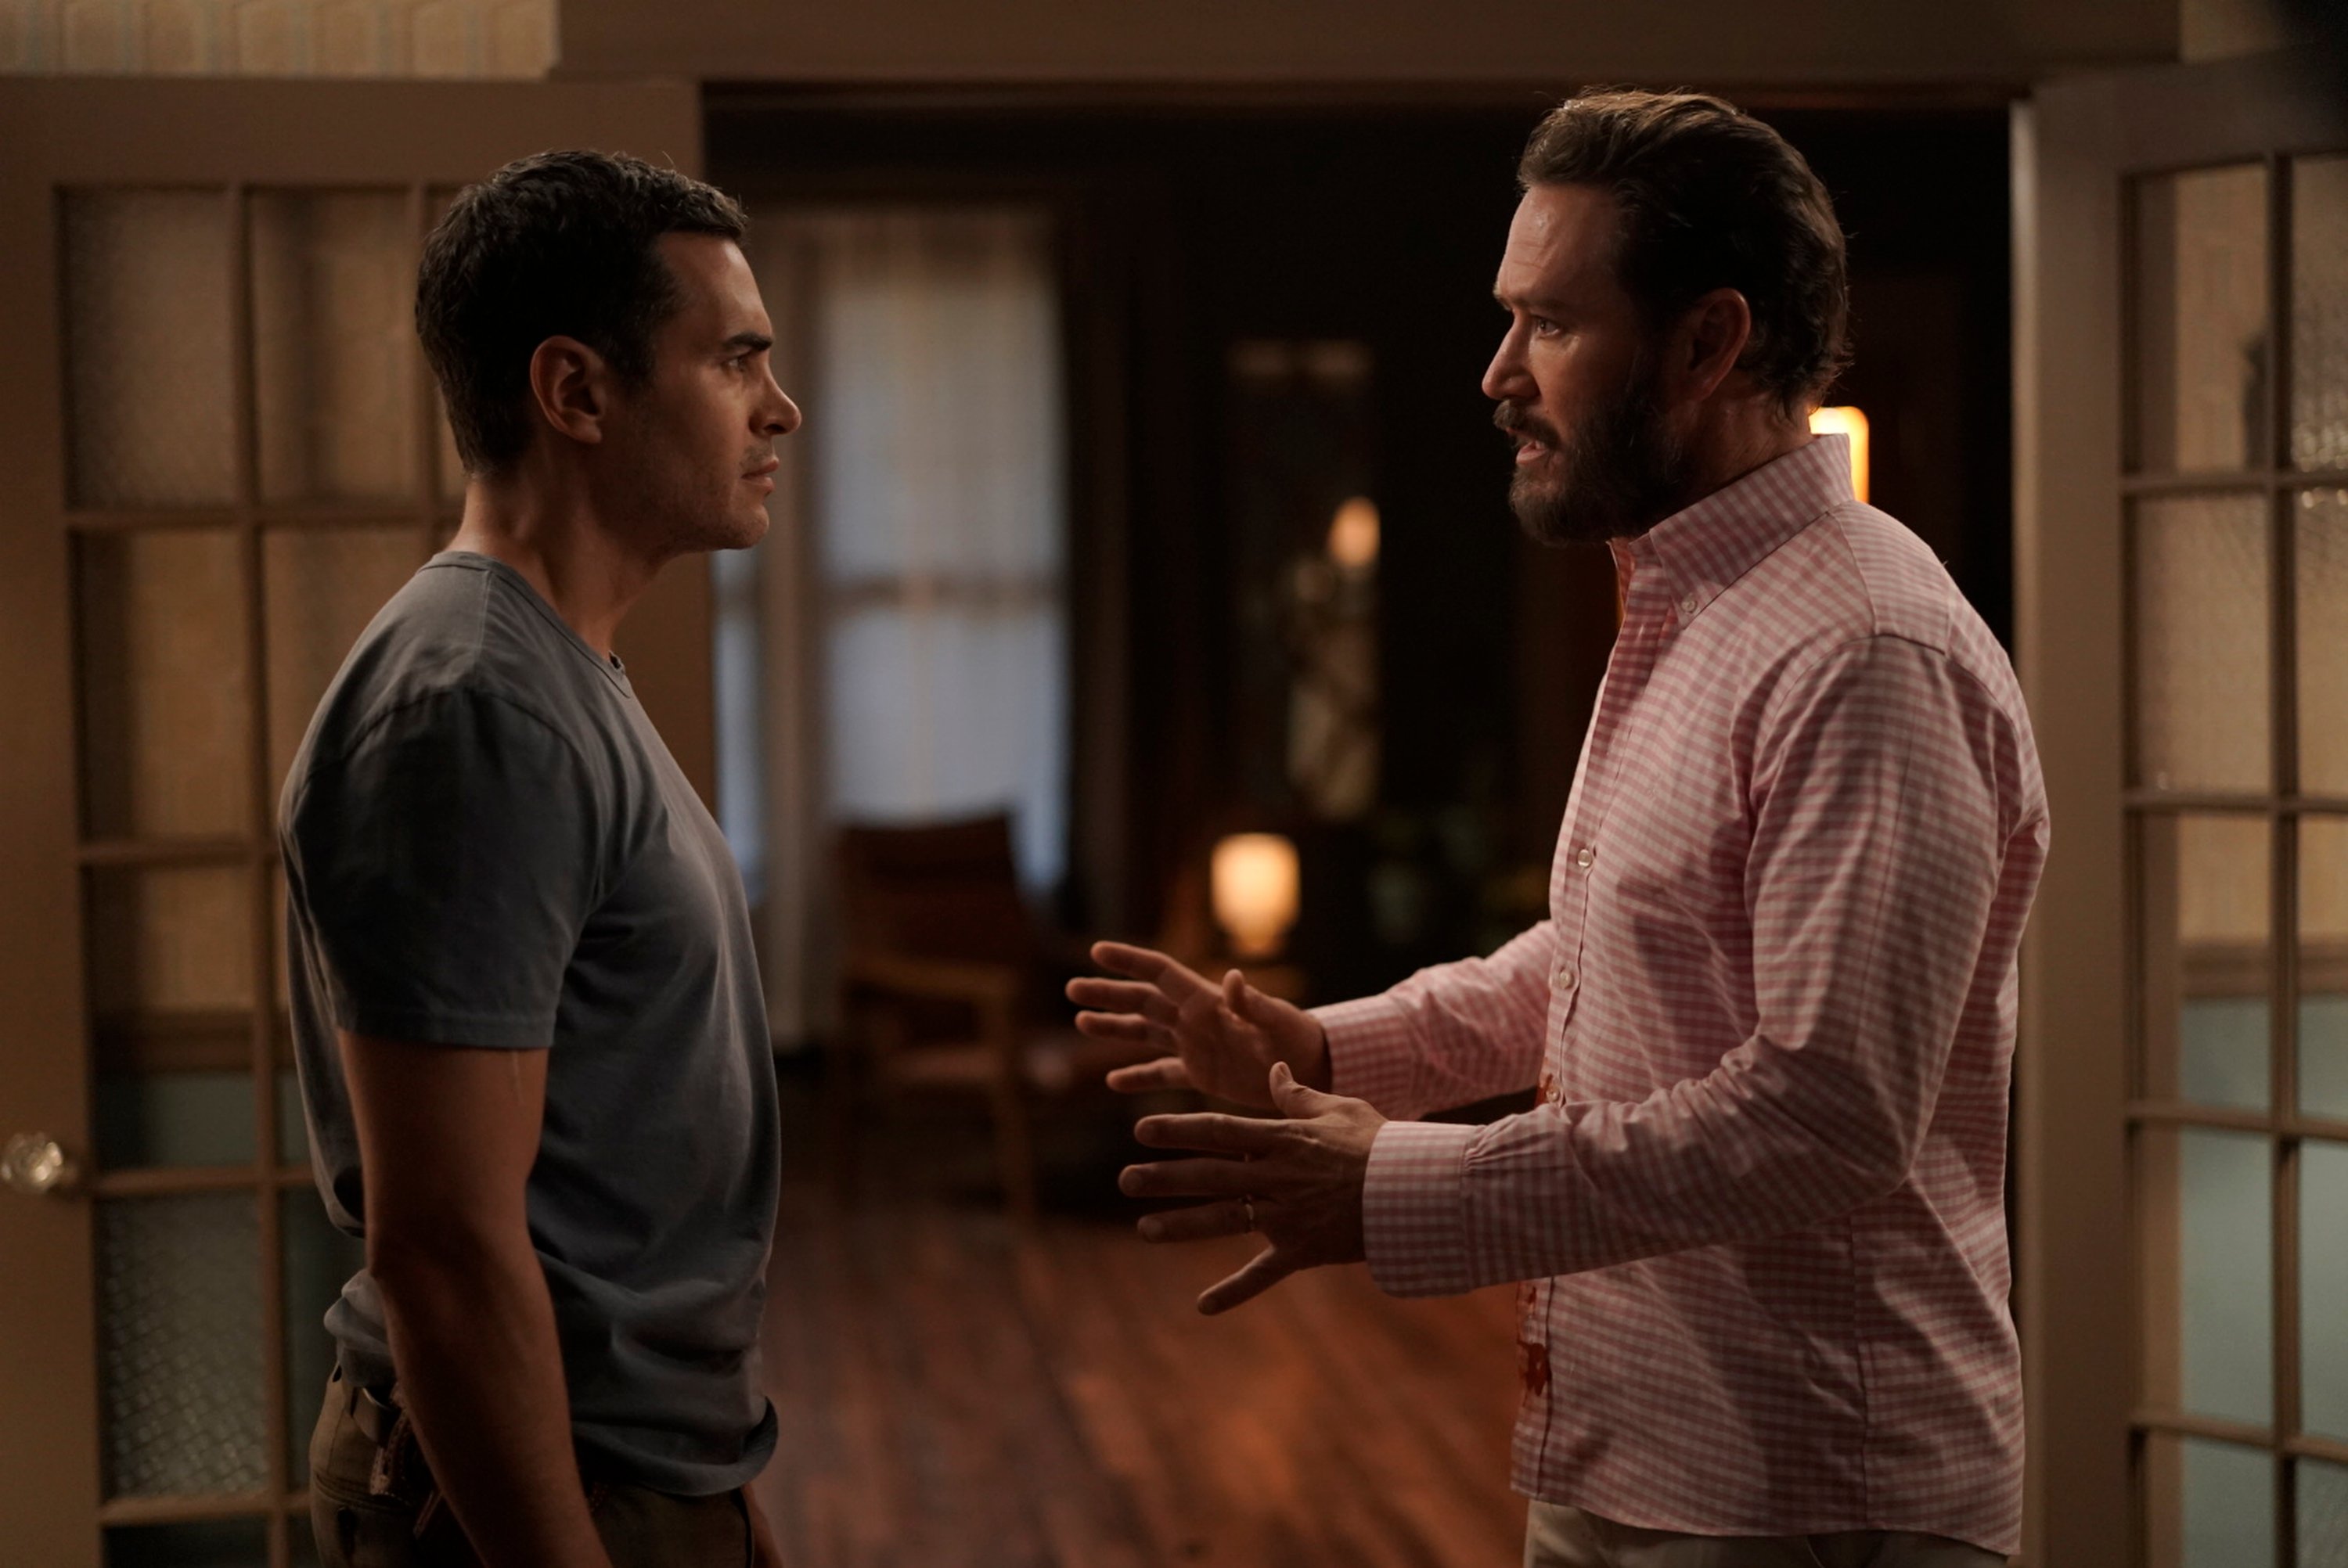 Ramón Rodríguez as Will Trent and Mark-Paul Gosselaar as Paul Campano in 'Will Trent' Season 1 Episode 2, 'I'm a Pretty Observant Guy.' Will wears a dark gray shirt. Paul wears a light pink and white checkered button-up shirt.